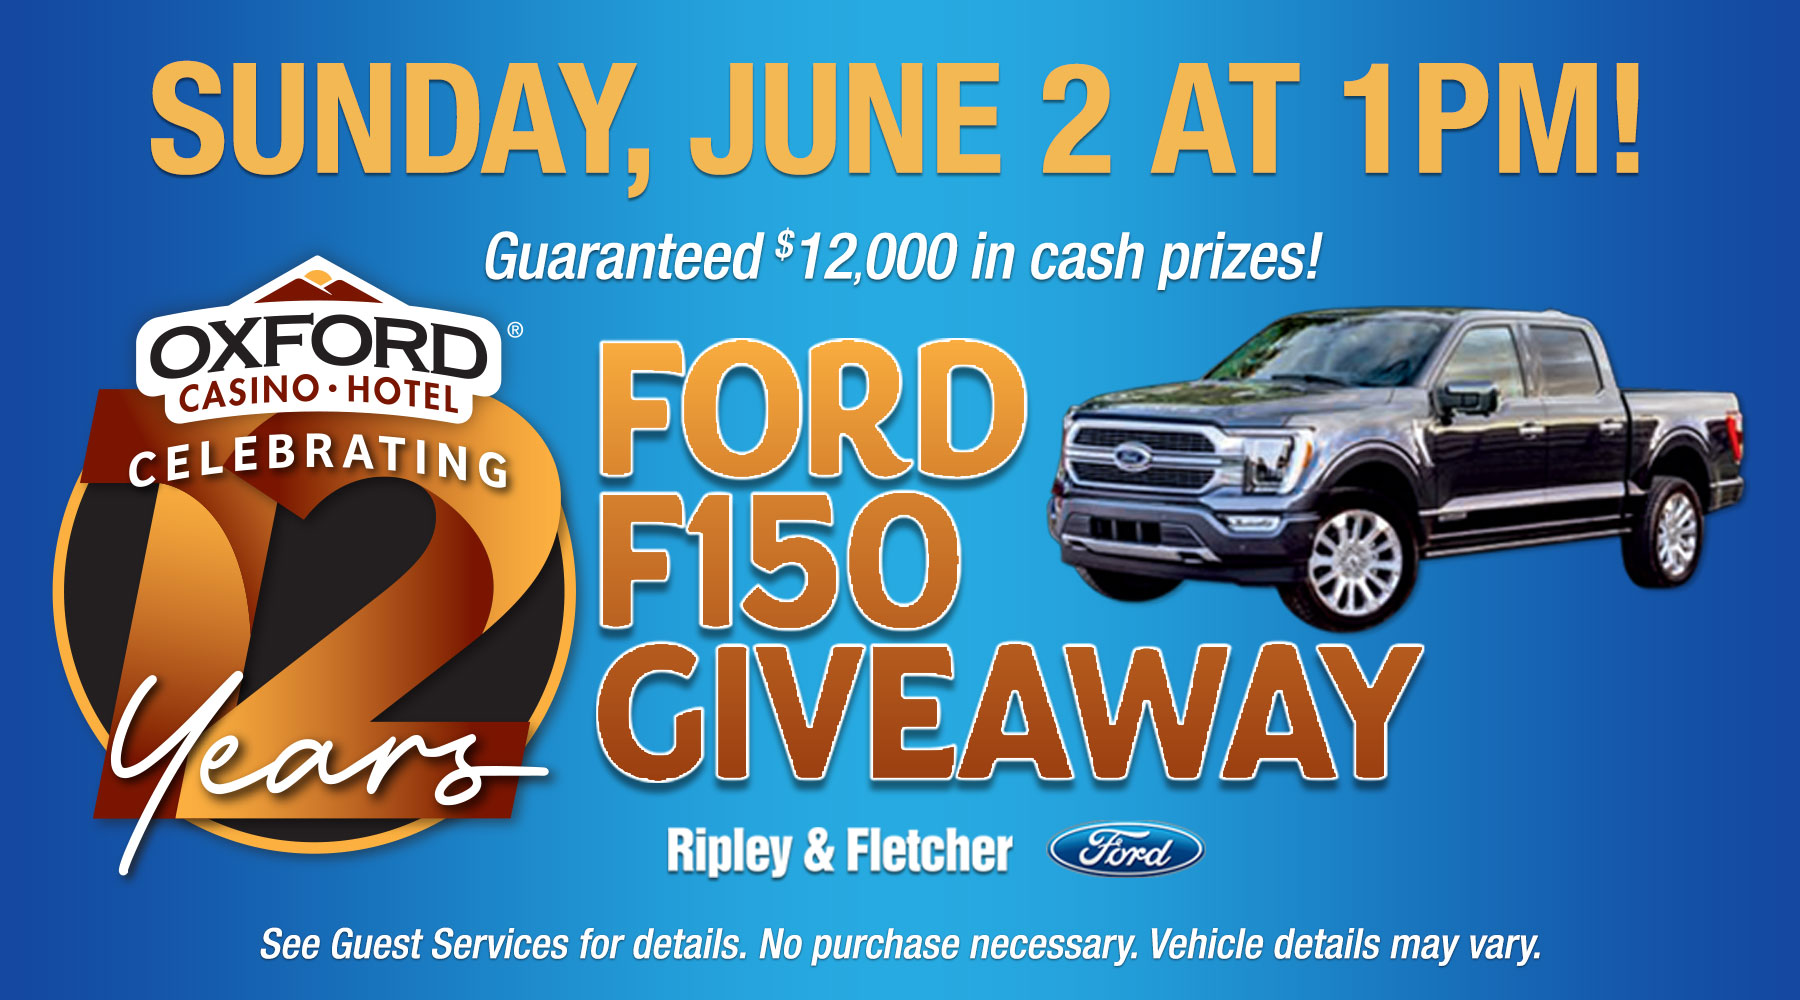 Ford f150 Giveaway at Oxford Casino Hotel!